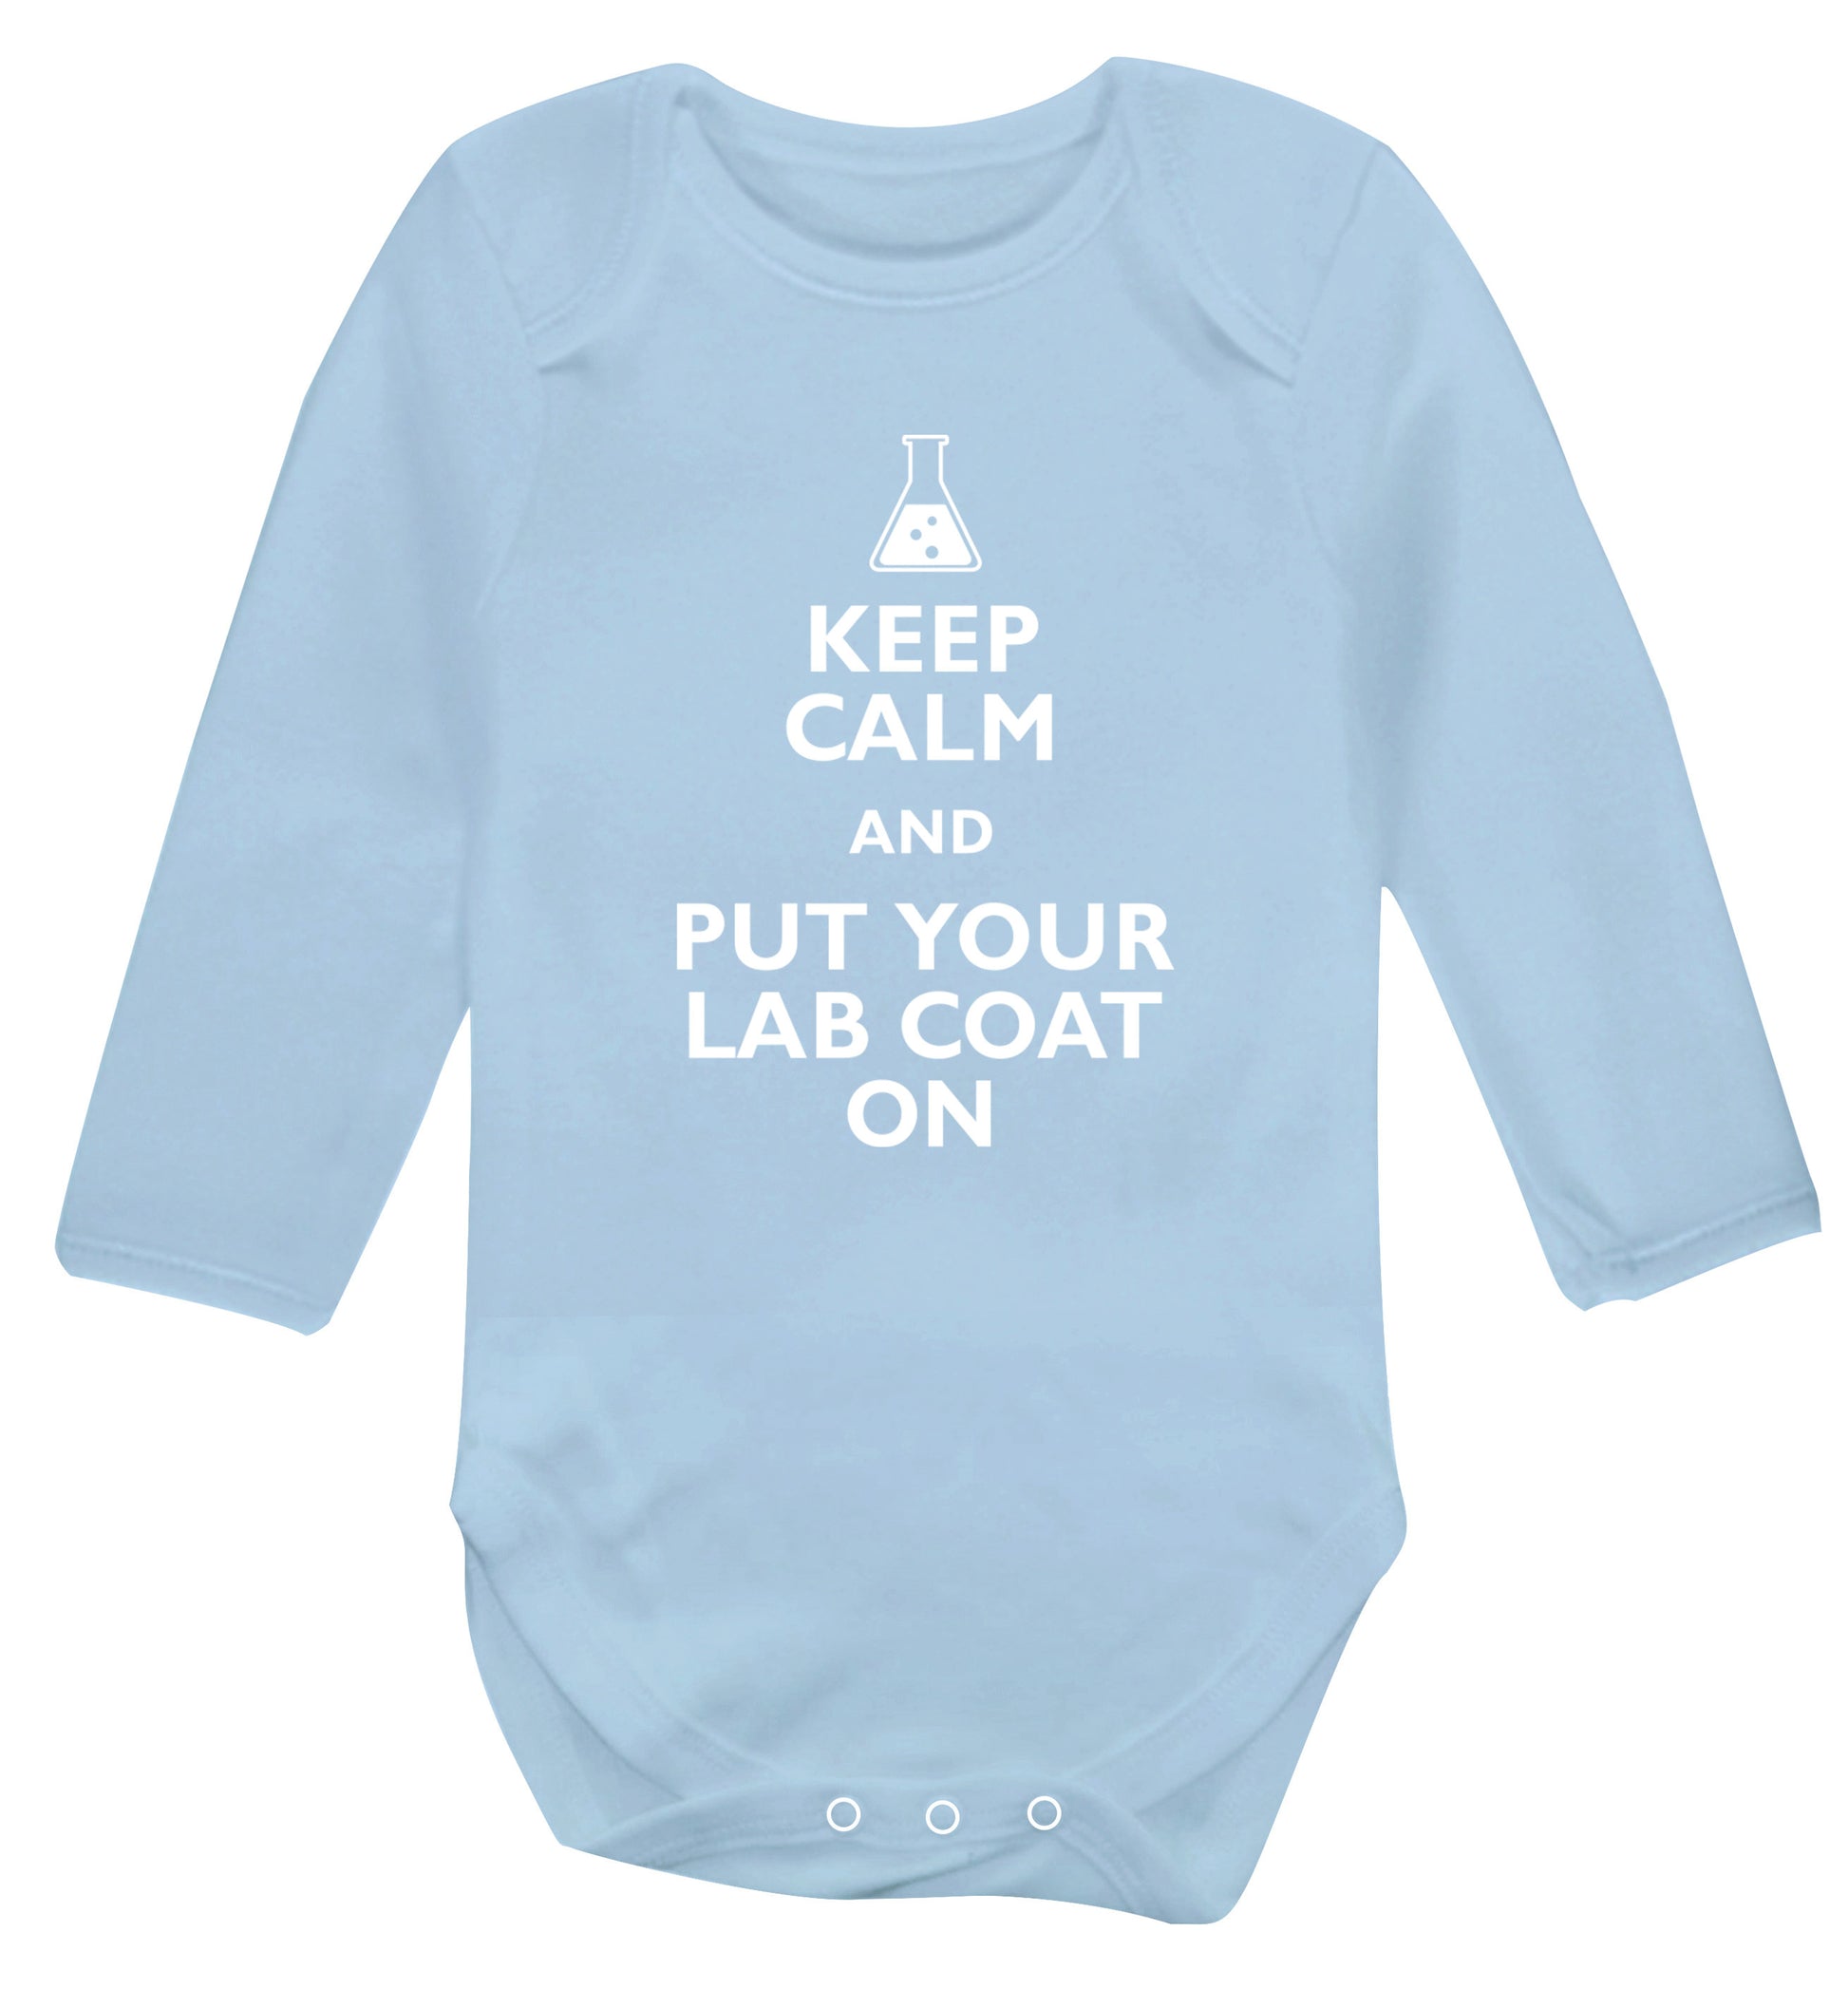 Keep calm and put your lab coat on Baby Vest long sleeved pale blue 6-12 months